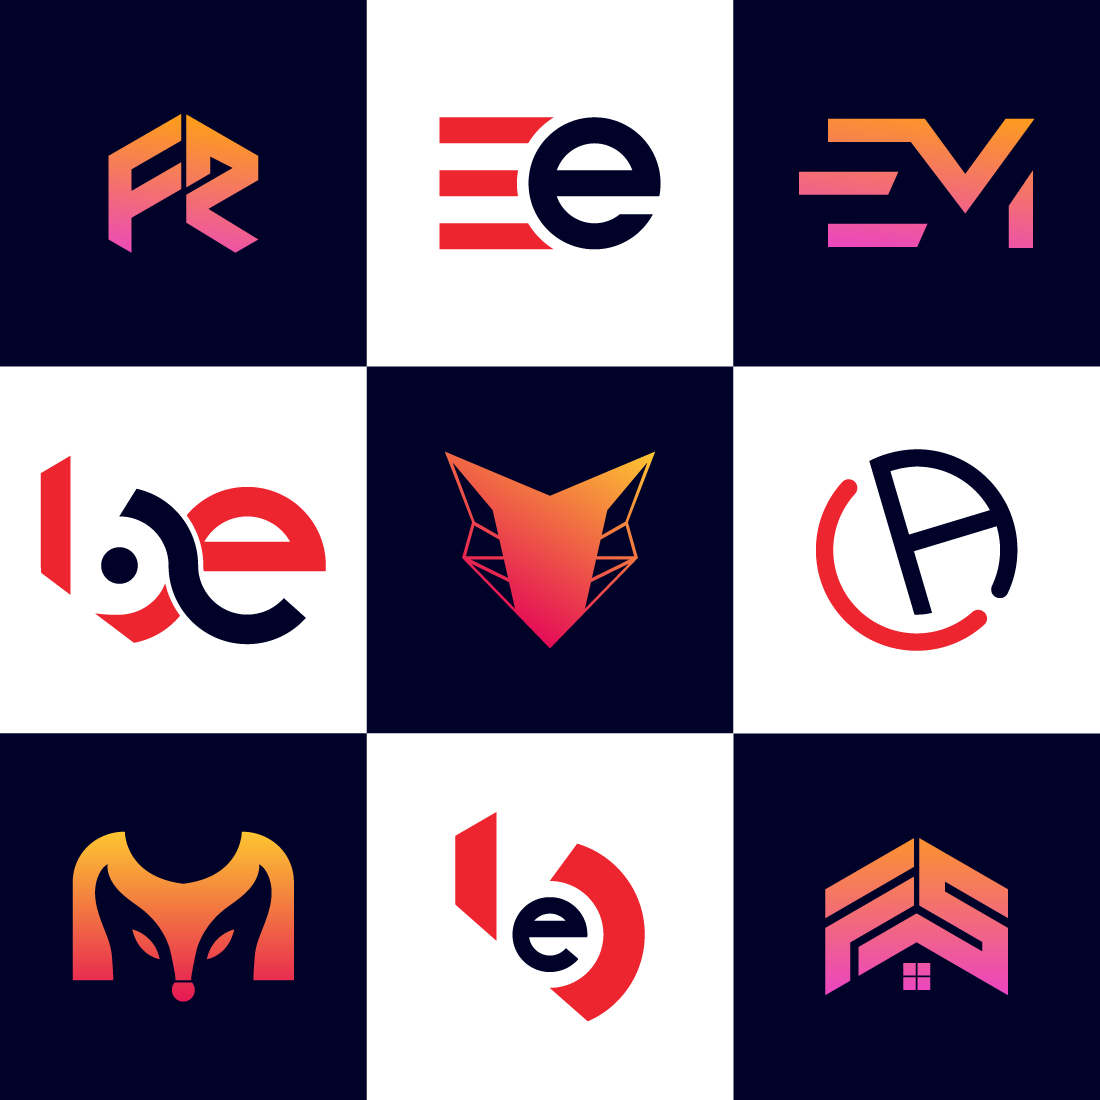 Collection of images with gorgeous logos in orange colors.